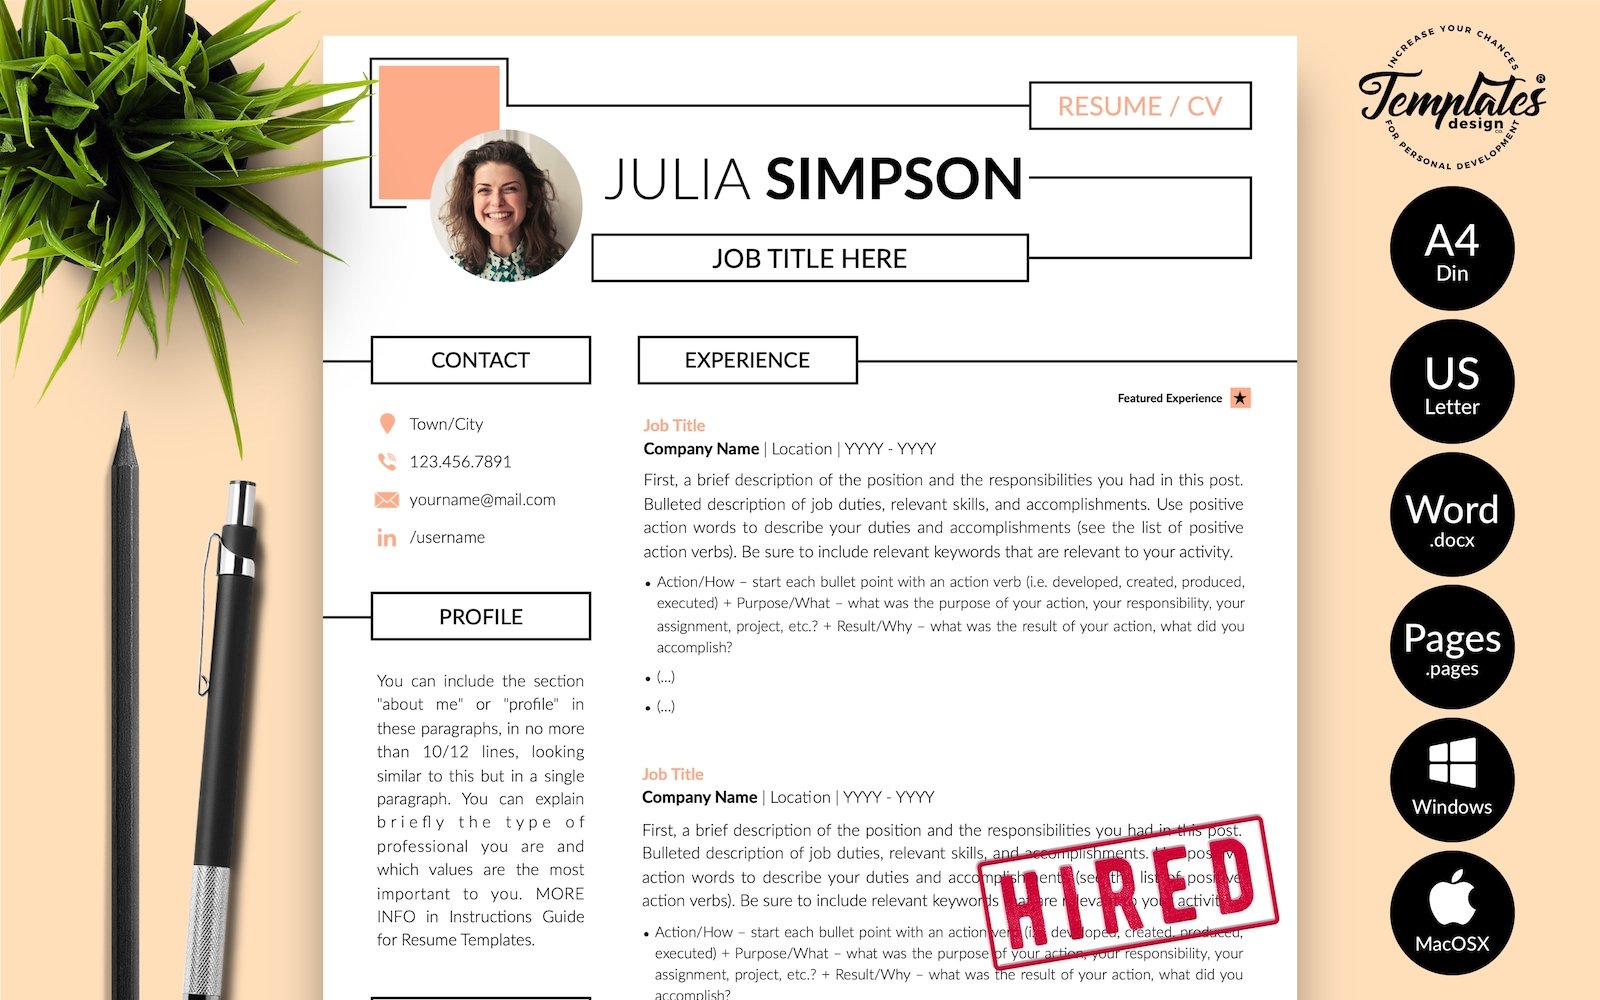 Julia Simpson - Creative CV Resume Template with Cover Letter for Microsoft Word & iWork Pages